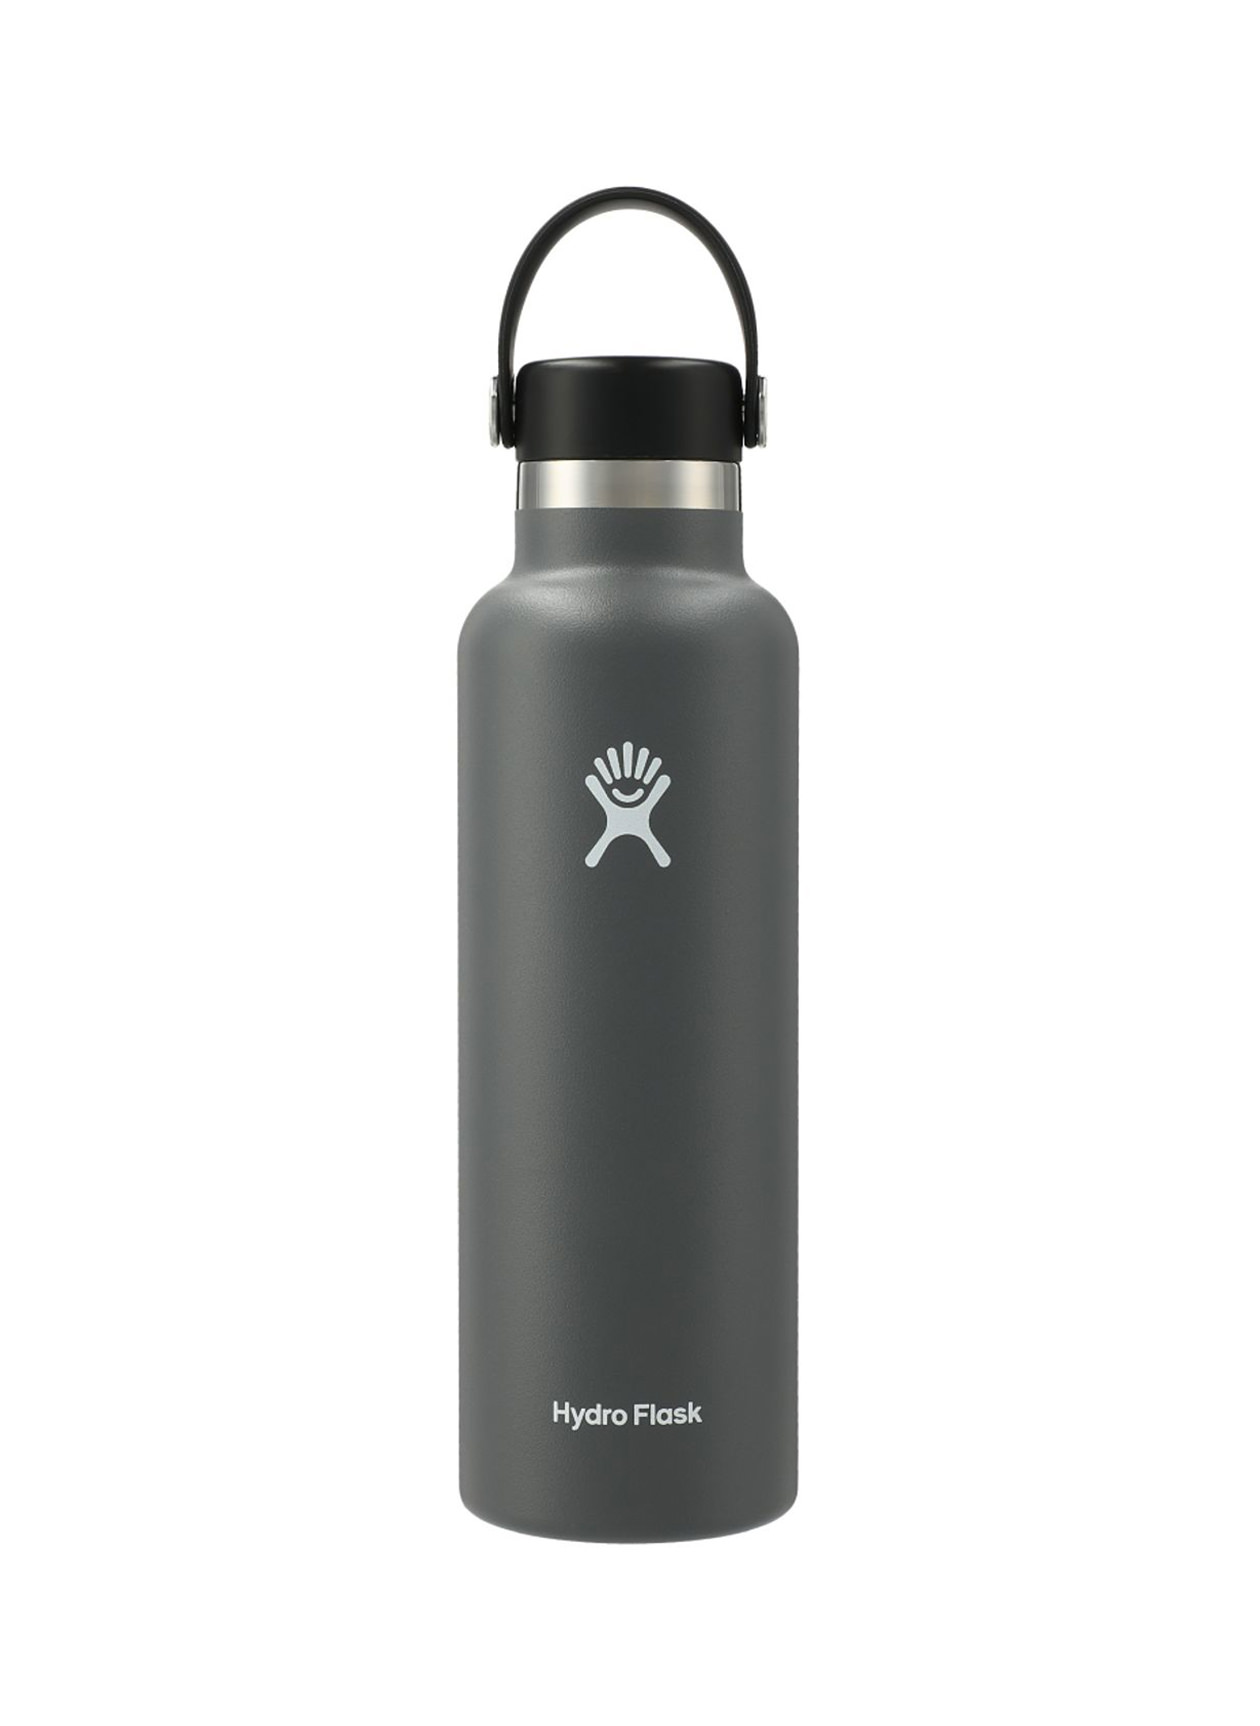 Personalized Hydro Flask 24 oz Standard Mouth Bottle - Customized